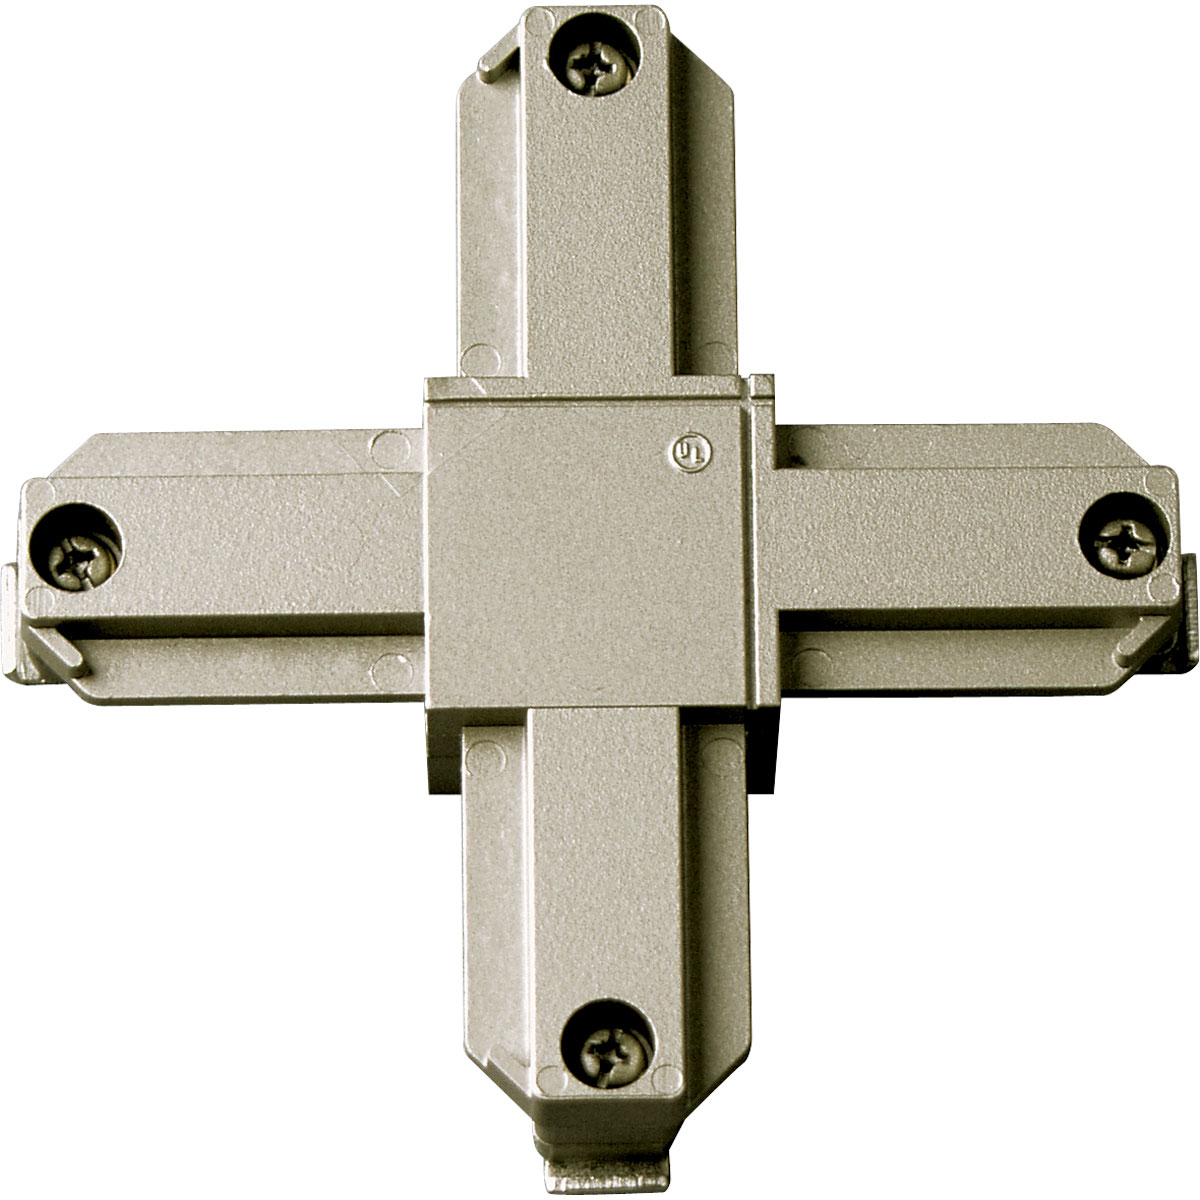 Cross connector for joining two or more track sections. The connectors plug into track sections only one way to ensure positive polarization. Brushed Nickel finish.